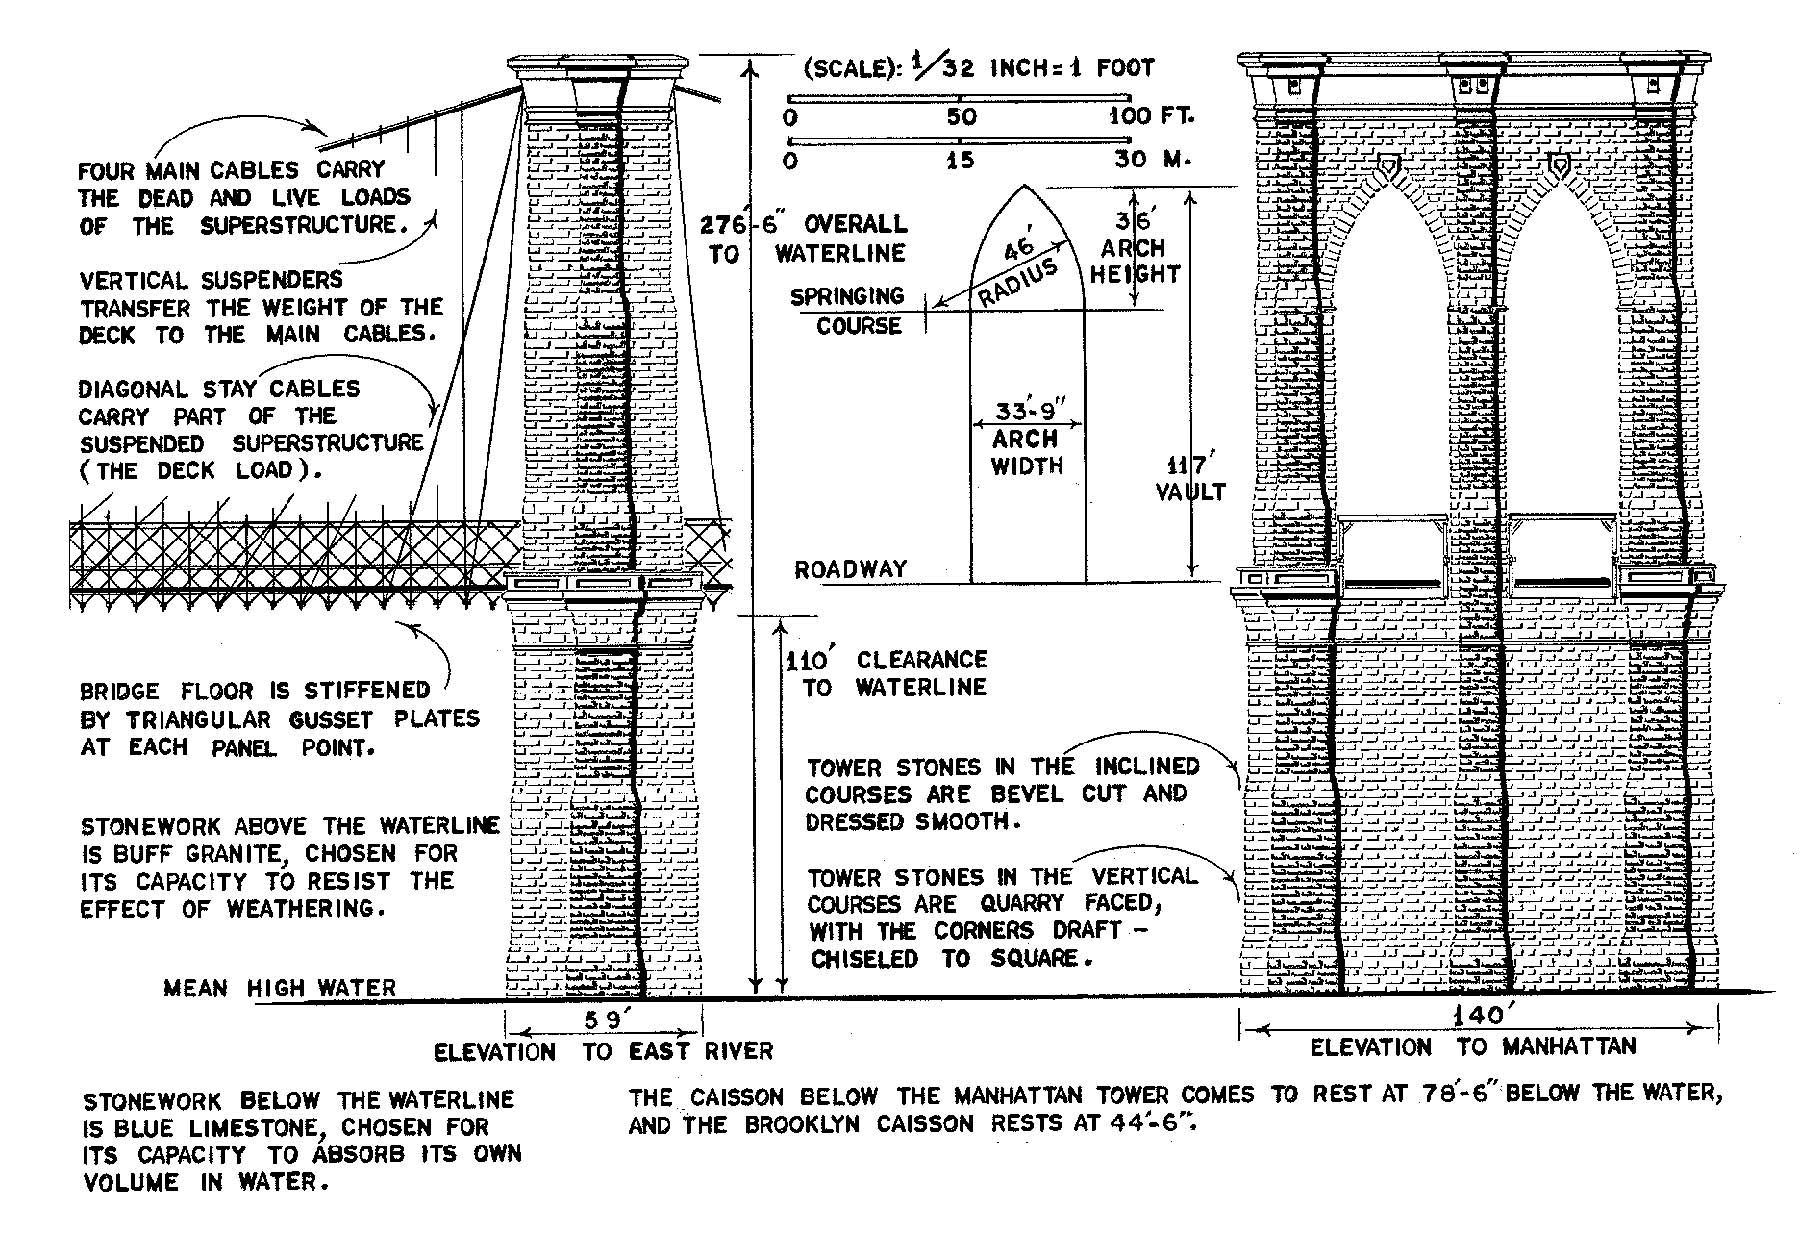 Black and white drawing that shows details of the Manhattan tower of the Brooklyn bridge showing elevations, waterline, stonework and other parts of the bridge.